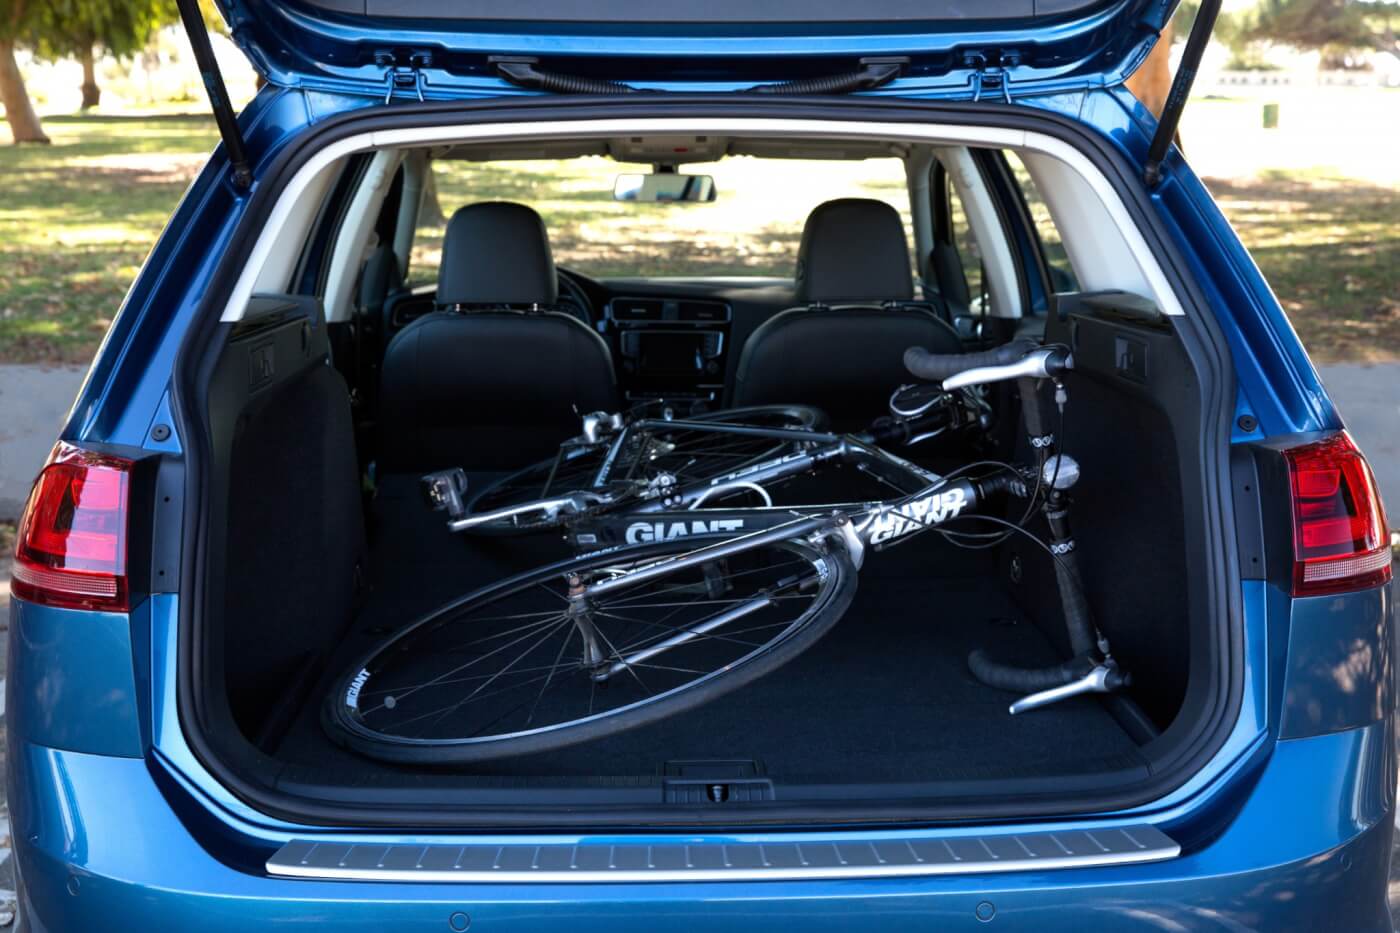 The Golf SportWagen is roomy enough for a mountain bike or a few dogs in the back. If you lead a sporty life, or have a large family, the extra room will be much appreciated. Compared to the last generation Jetta SportWagen, it has slightly more passenger space and legroom.